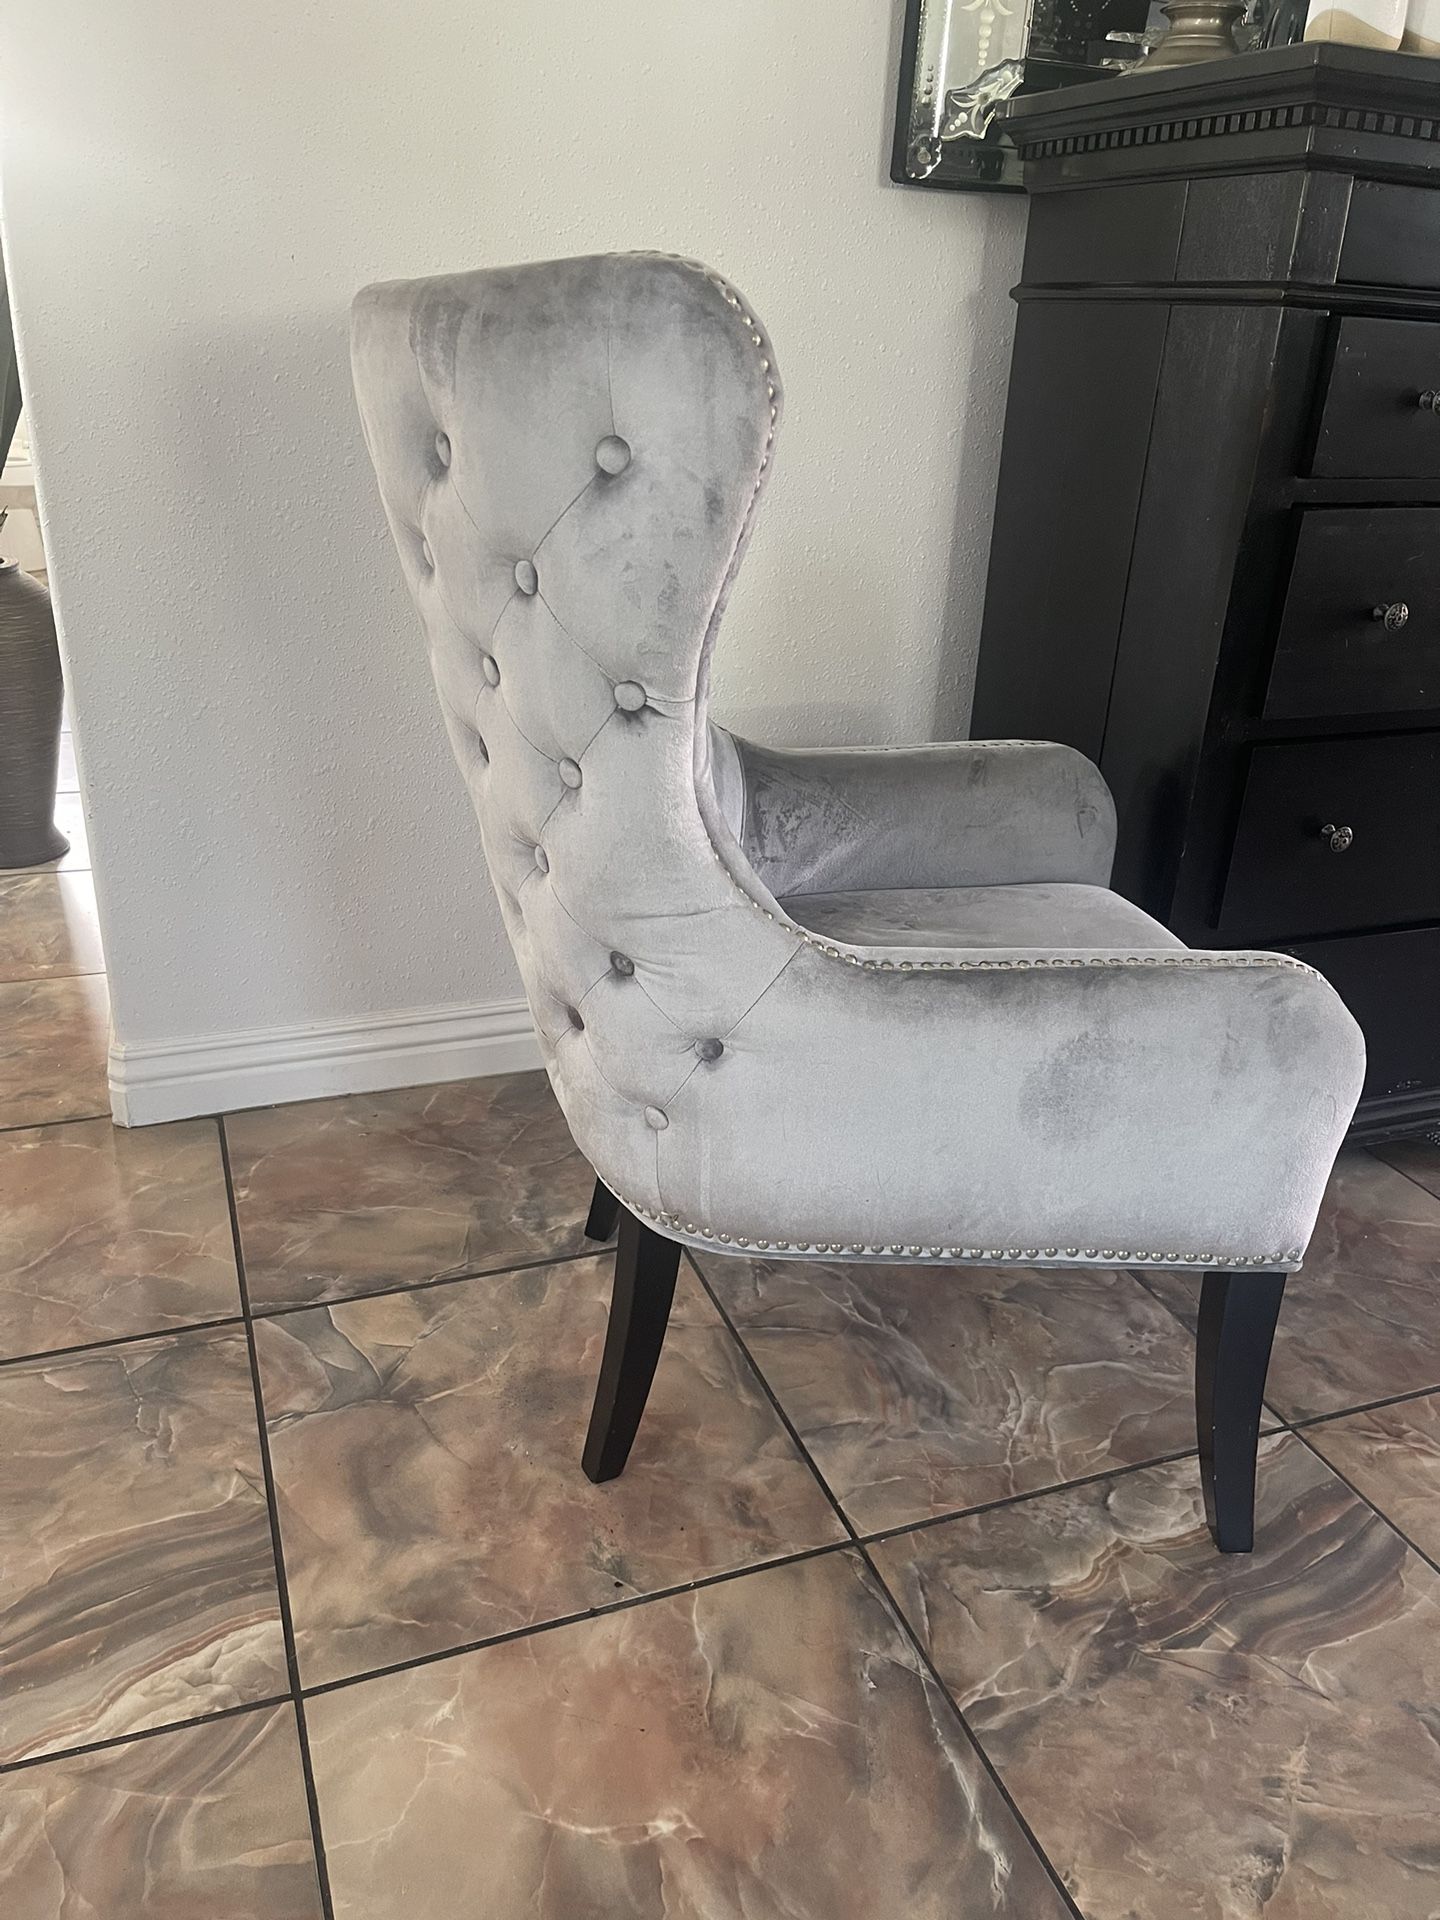 Tufted Back Wingback Chairs (2) Gray $140 For Both 